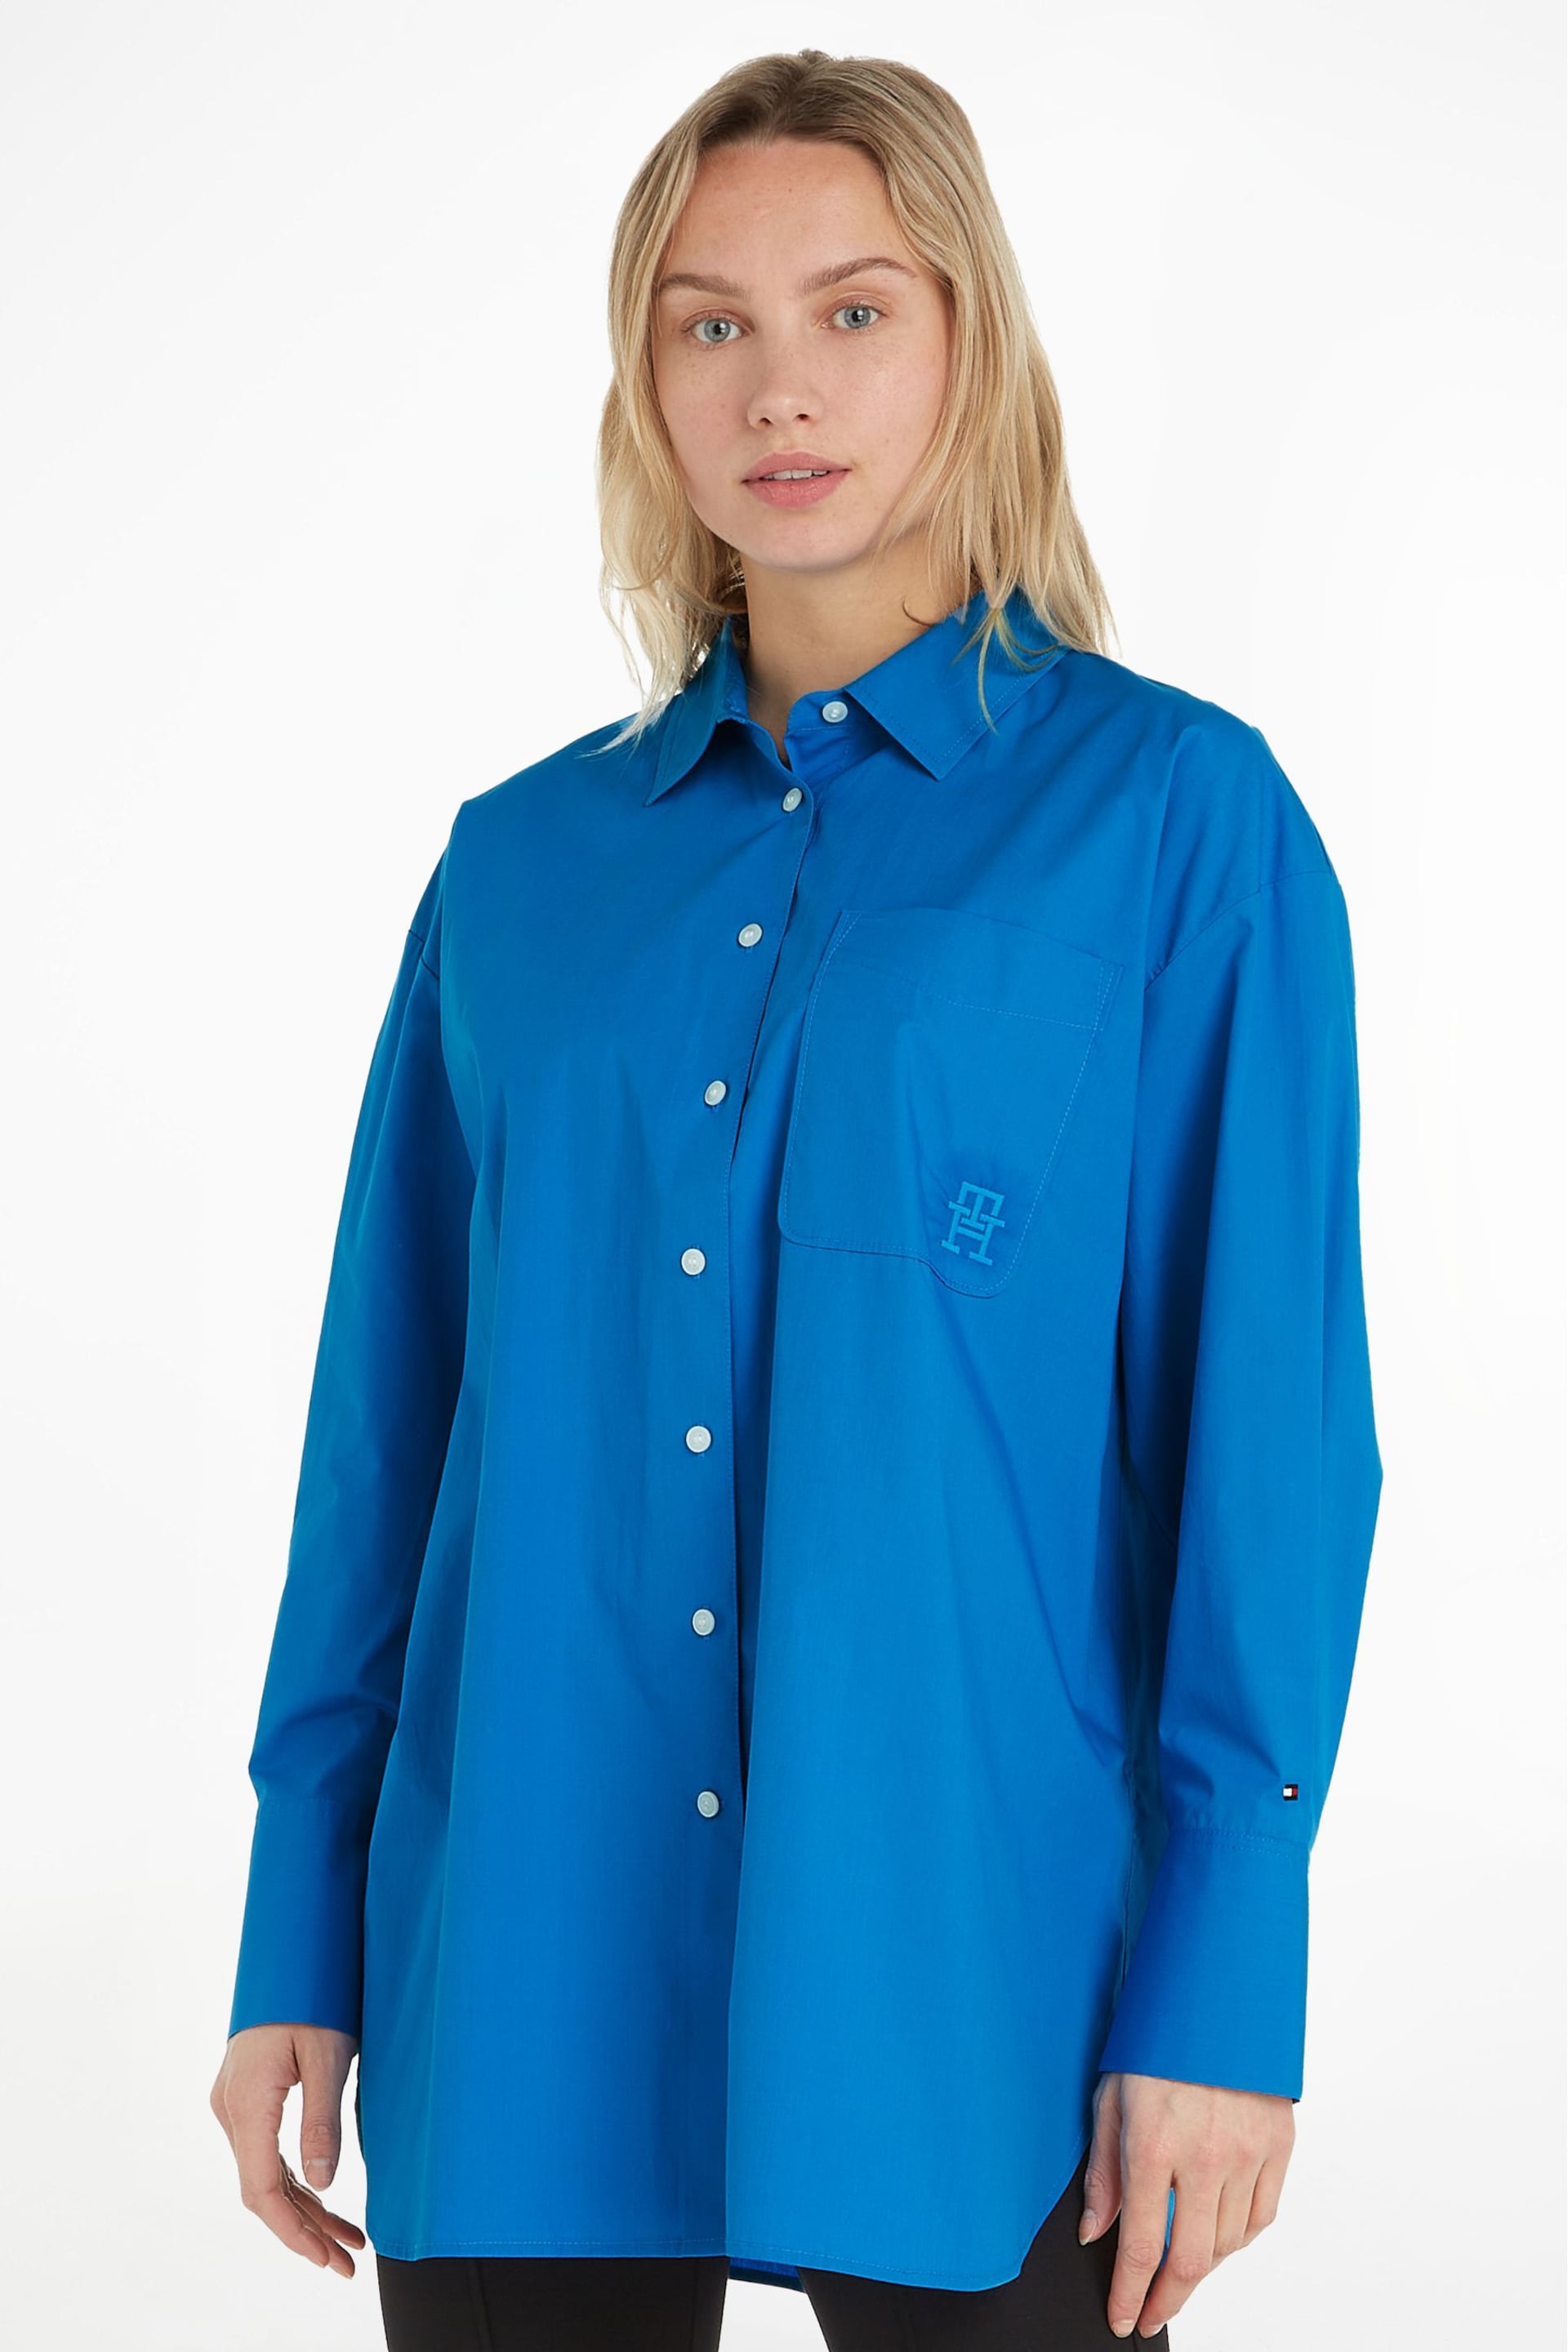 Tommy Hilfiger Blue Organic Cotton Loose Fit Shirt - Image 1 of 8